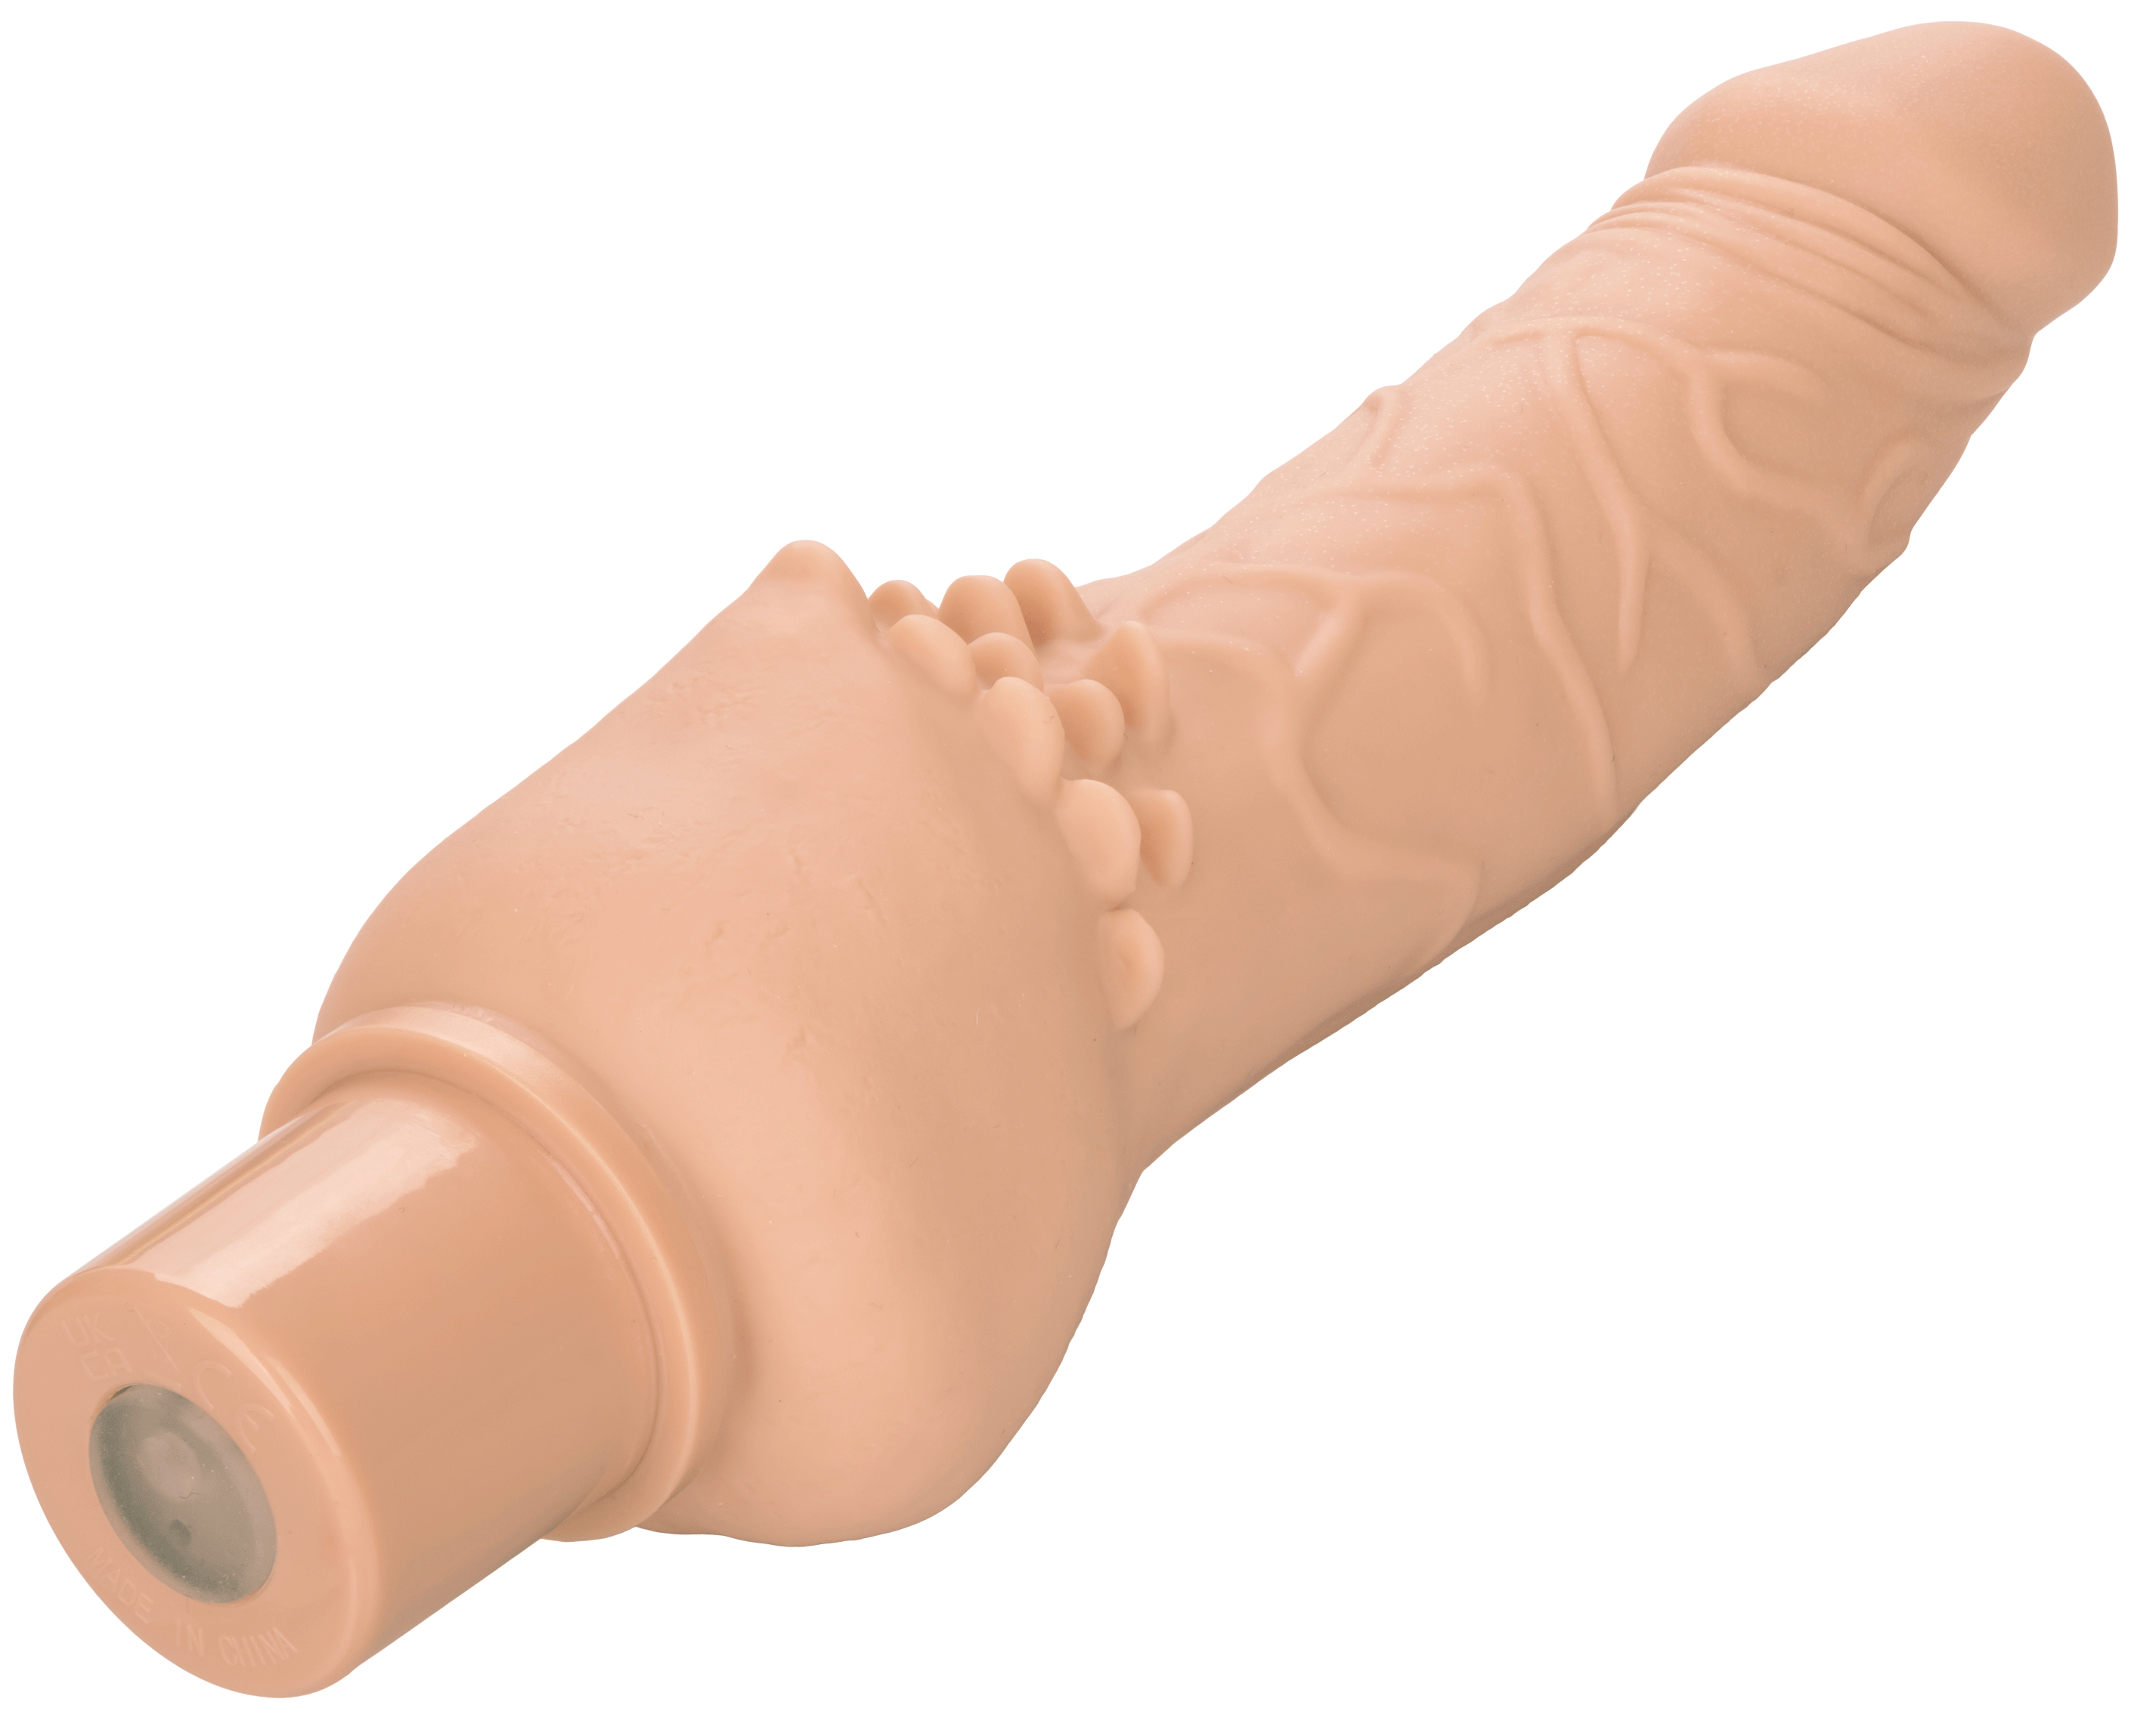 rechargeable power stud cliterrific ivory .gif